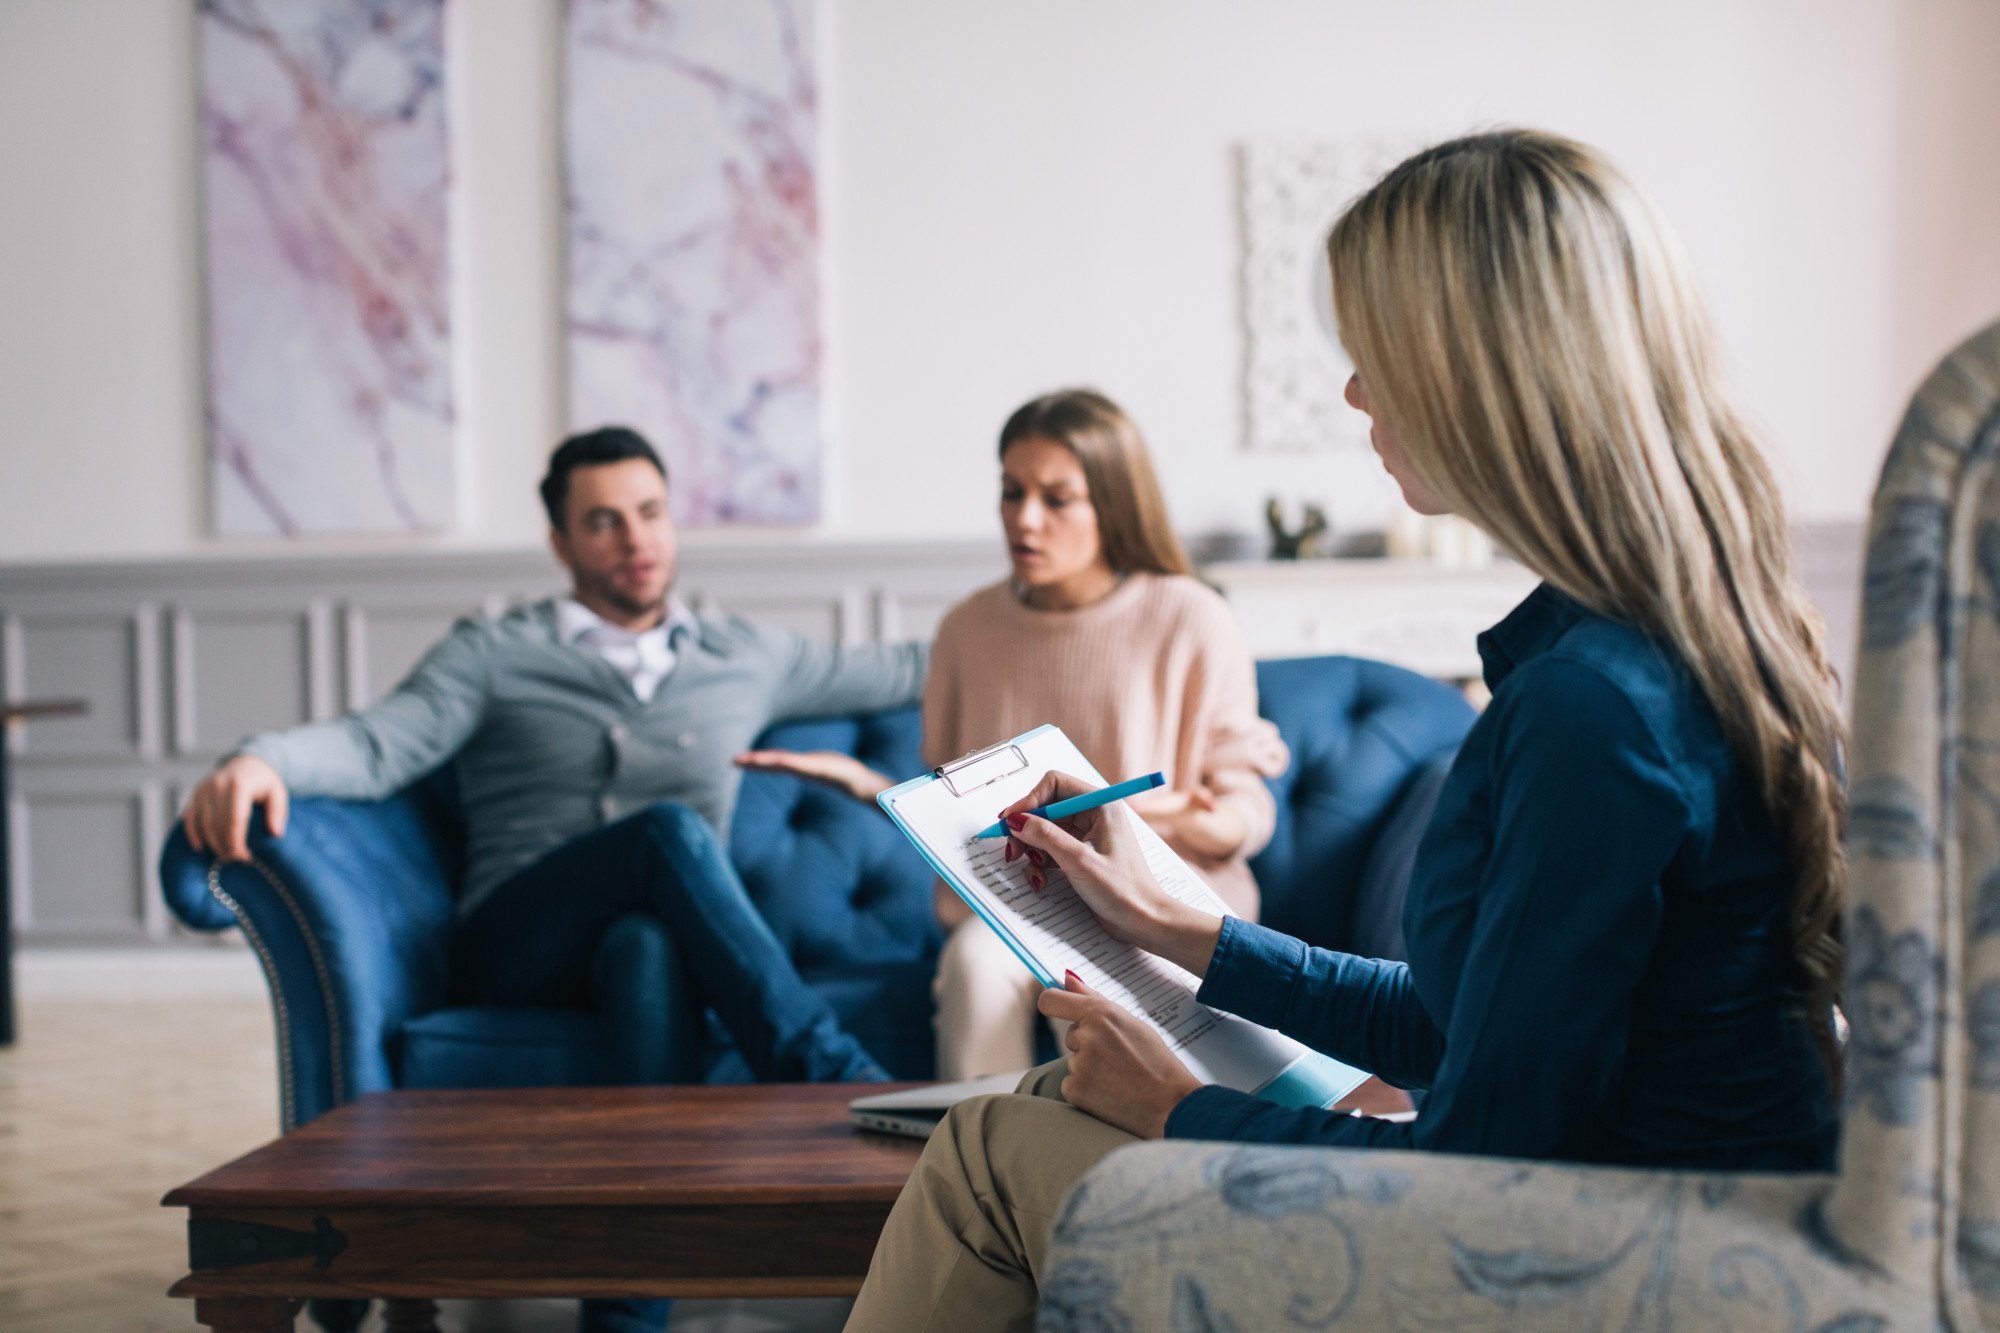 You get to ask questions during marriage counseling. Find possible couples therapy questions to ask and find answers to here.